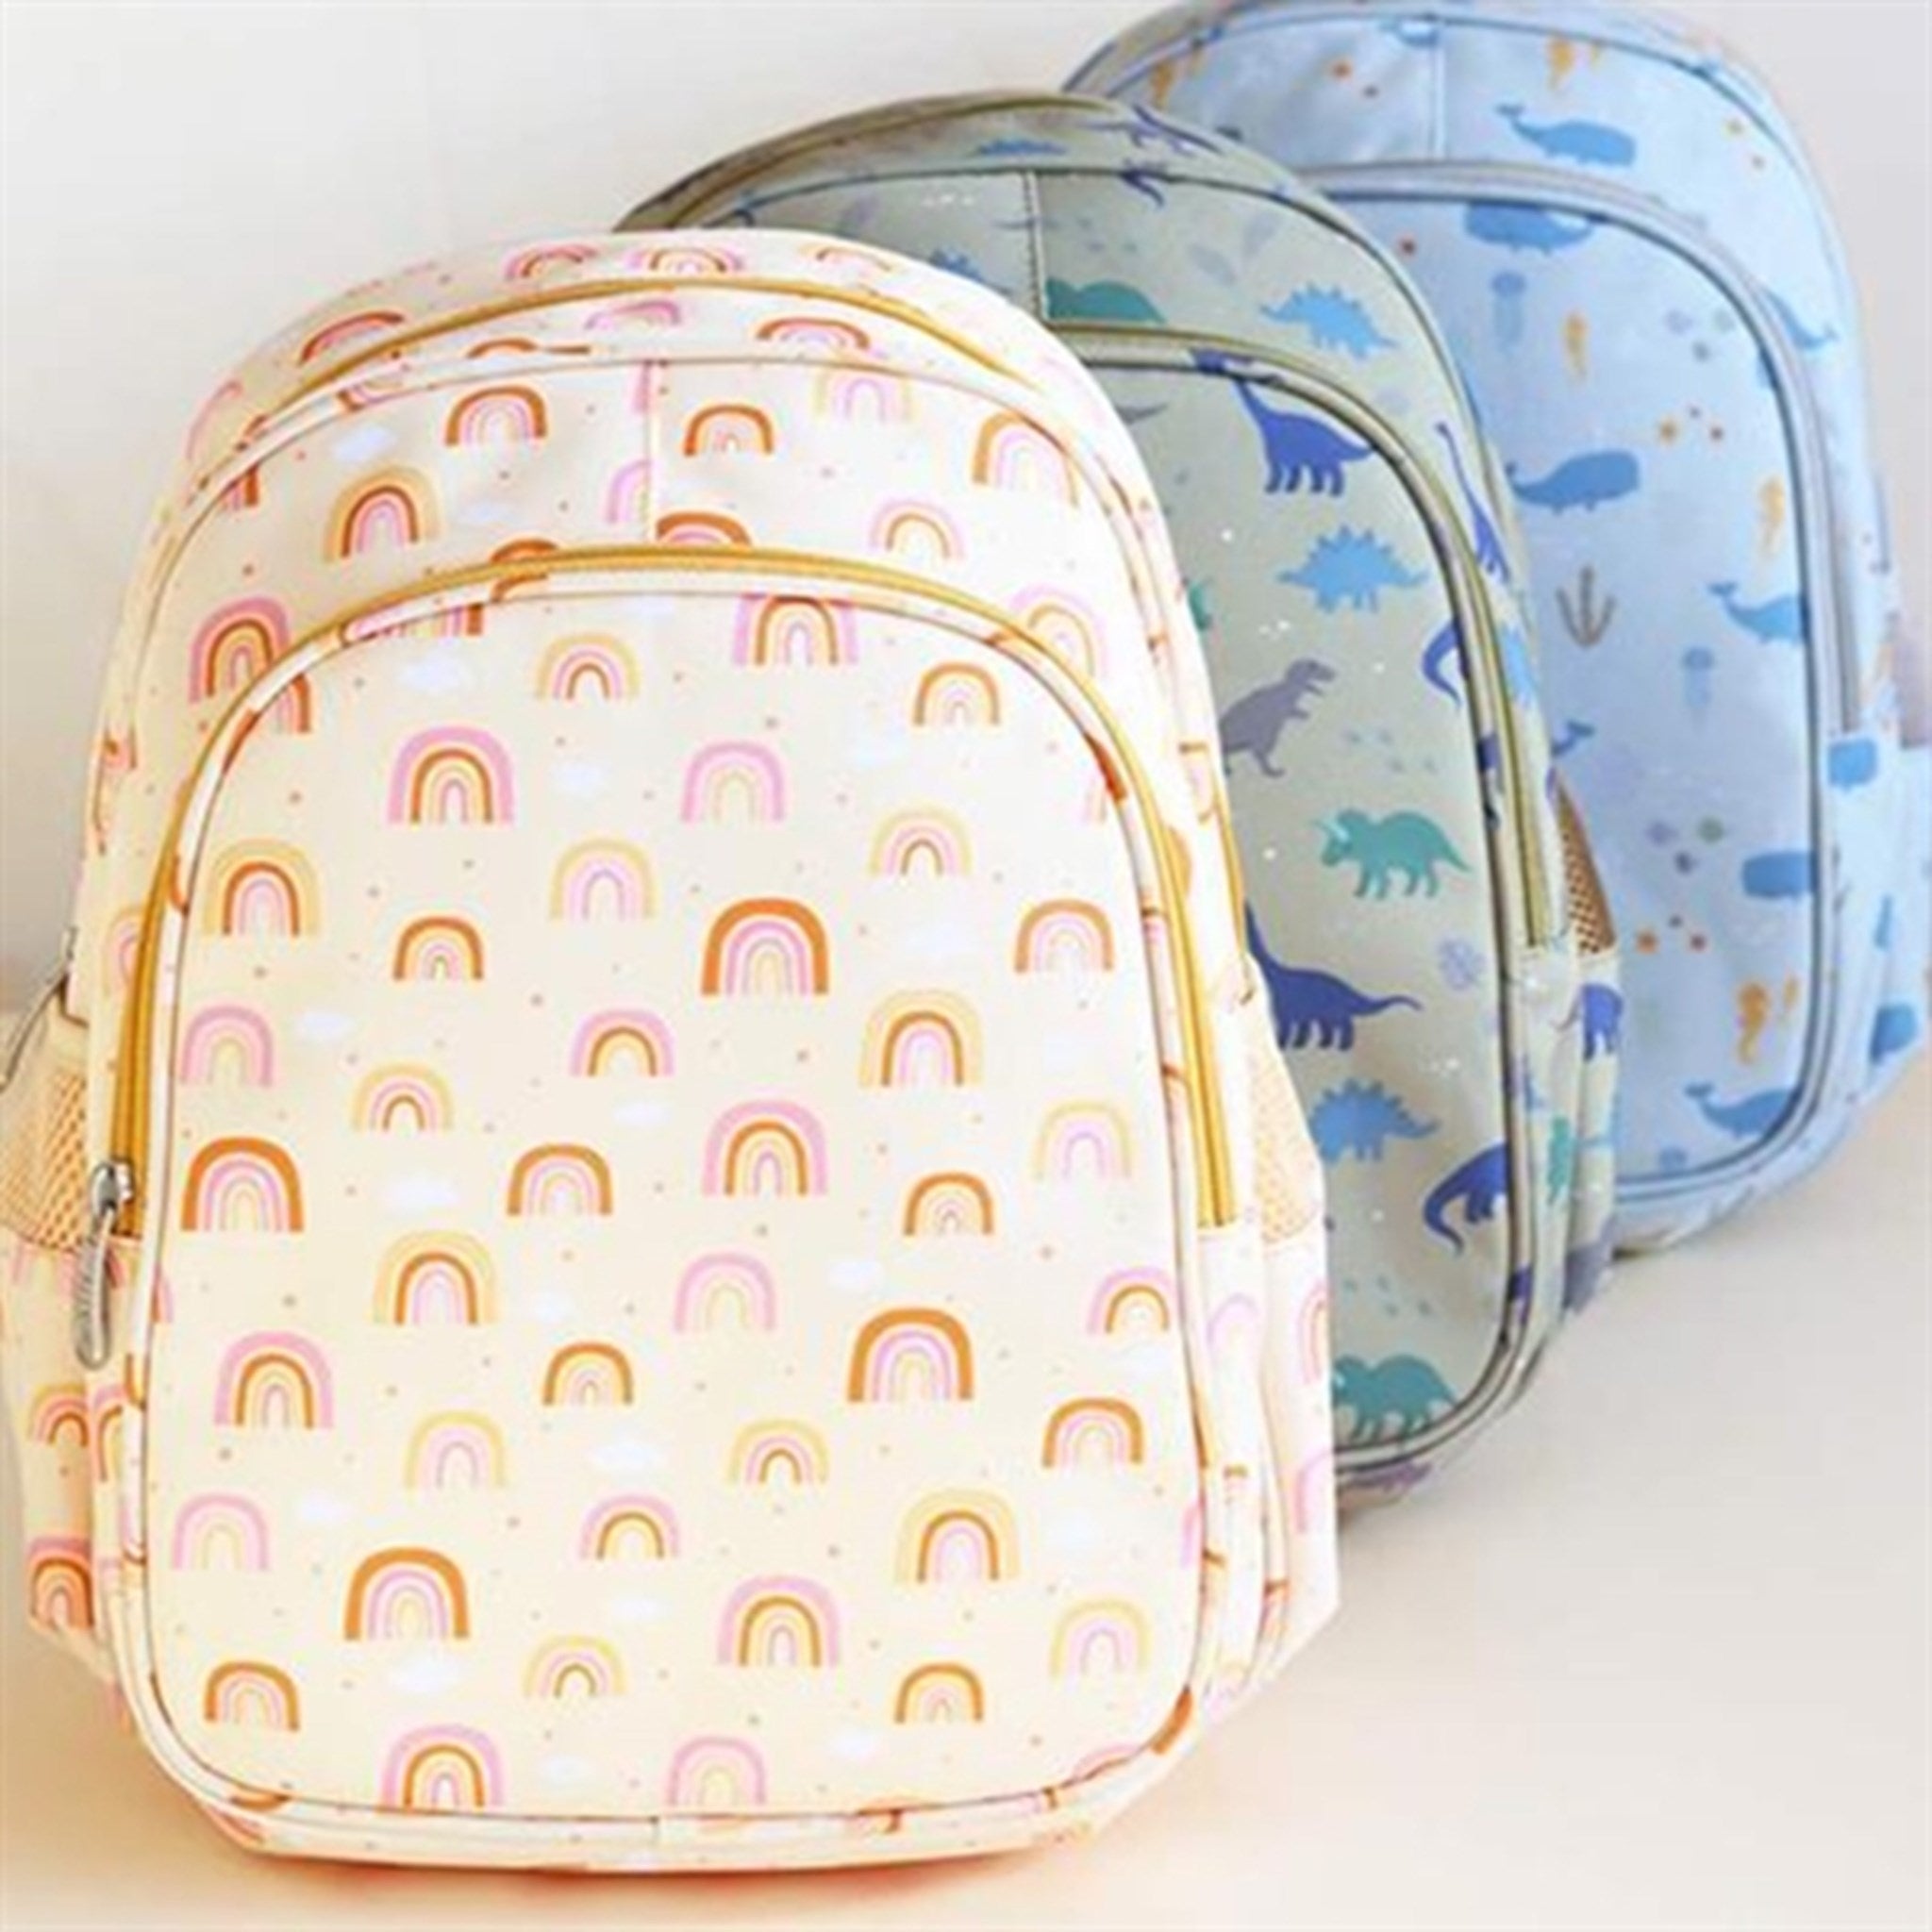 A Little Lovely Company Backpack Rainbows 6